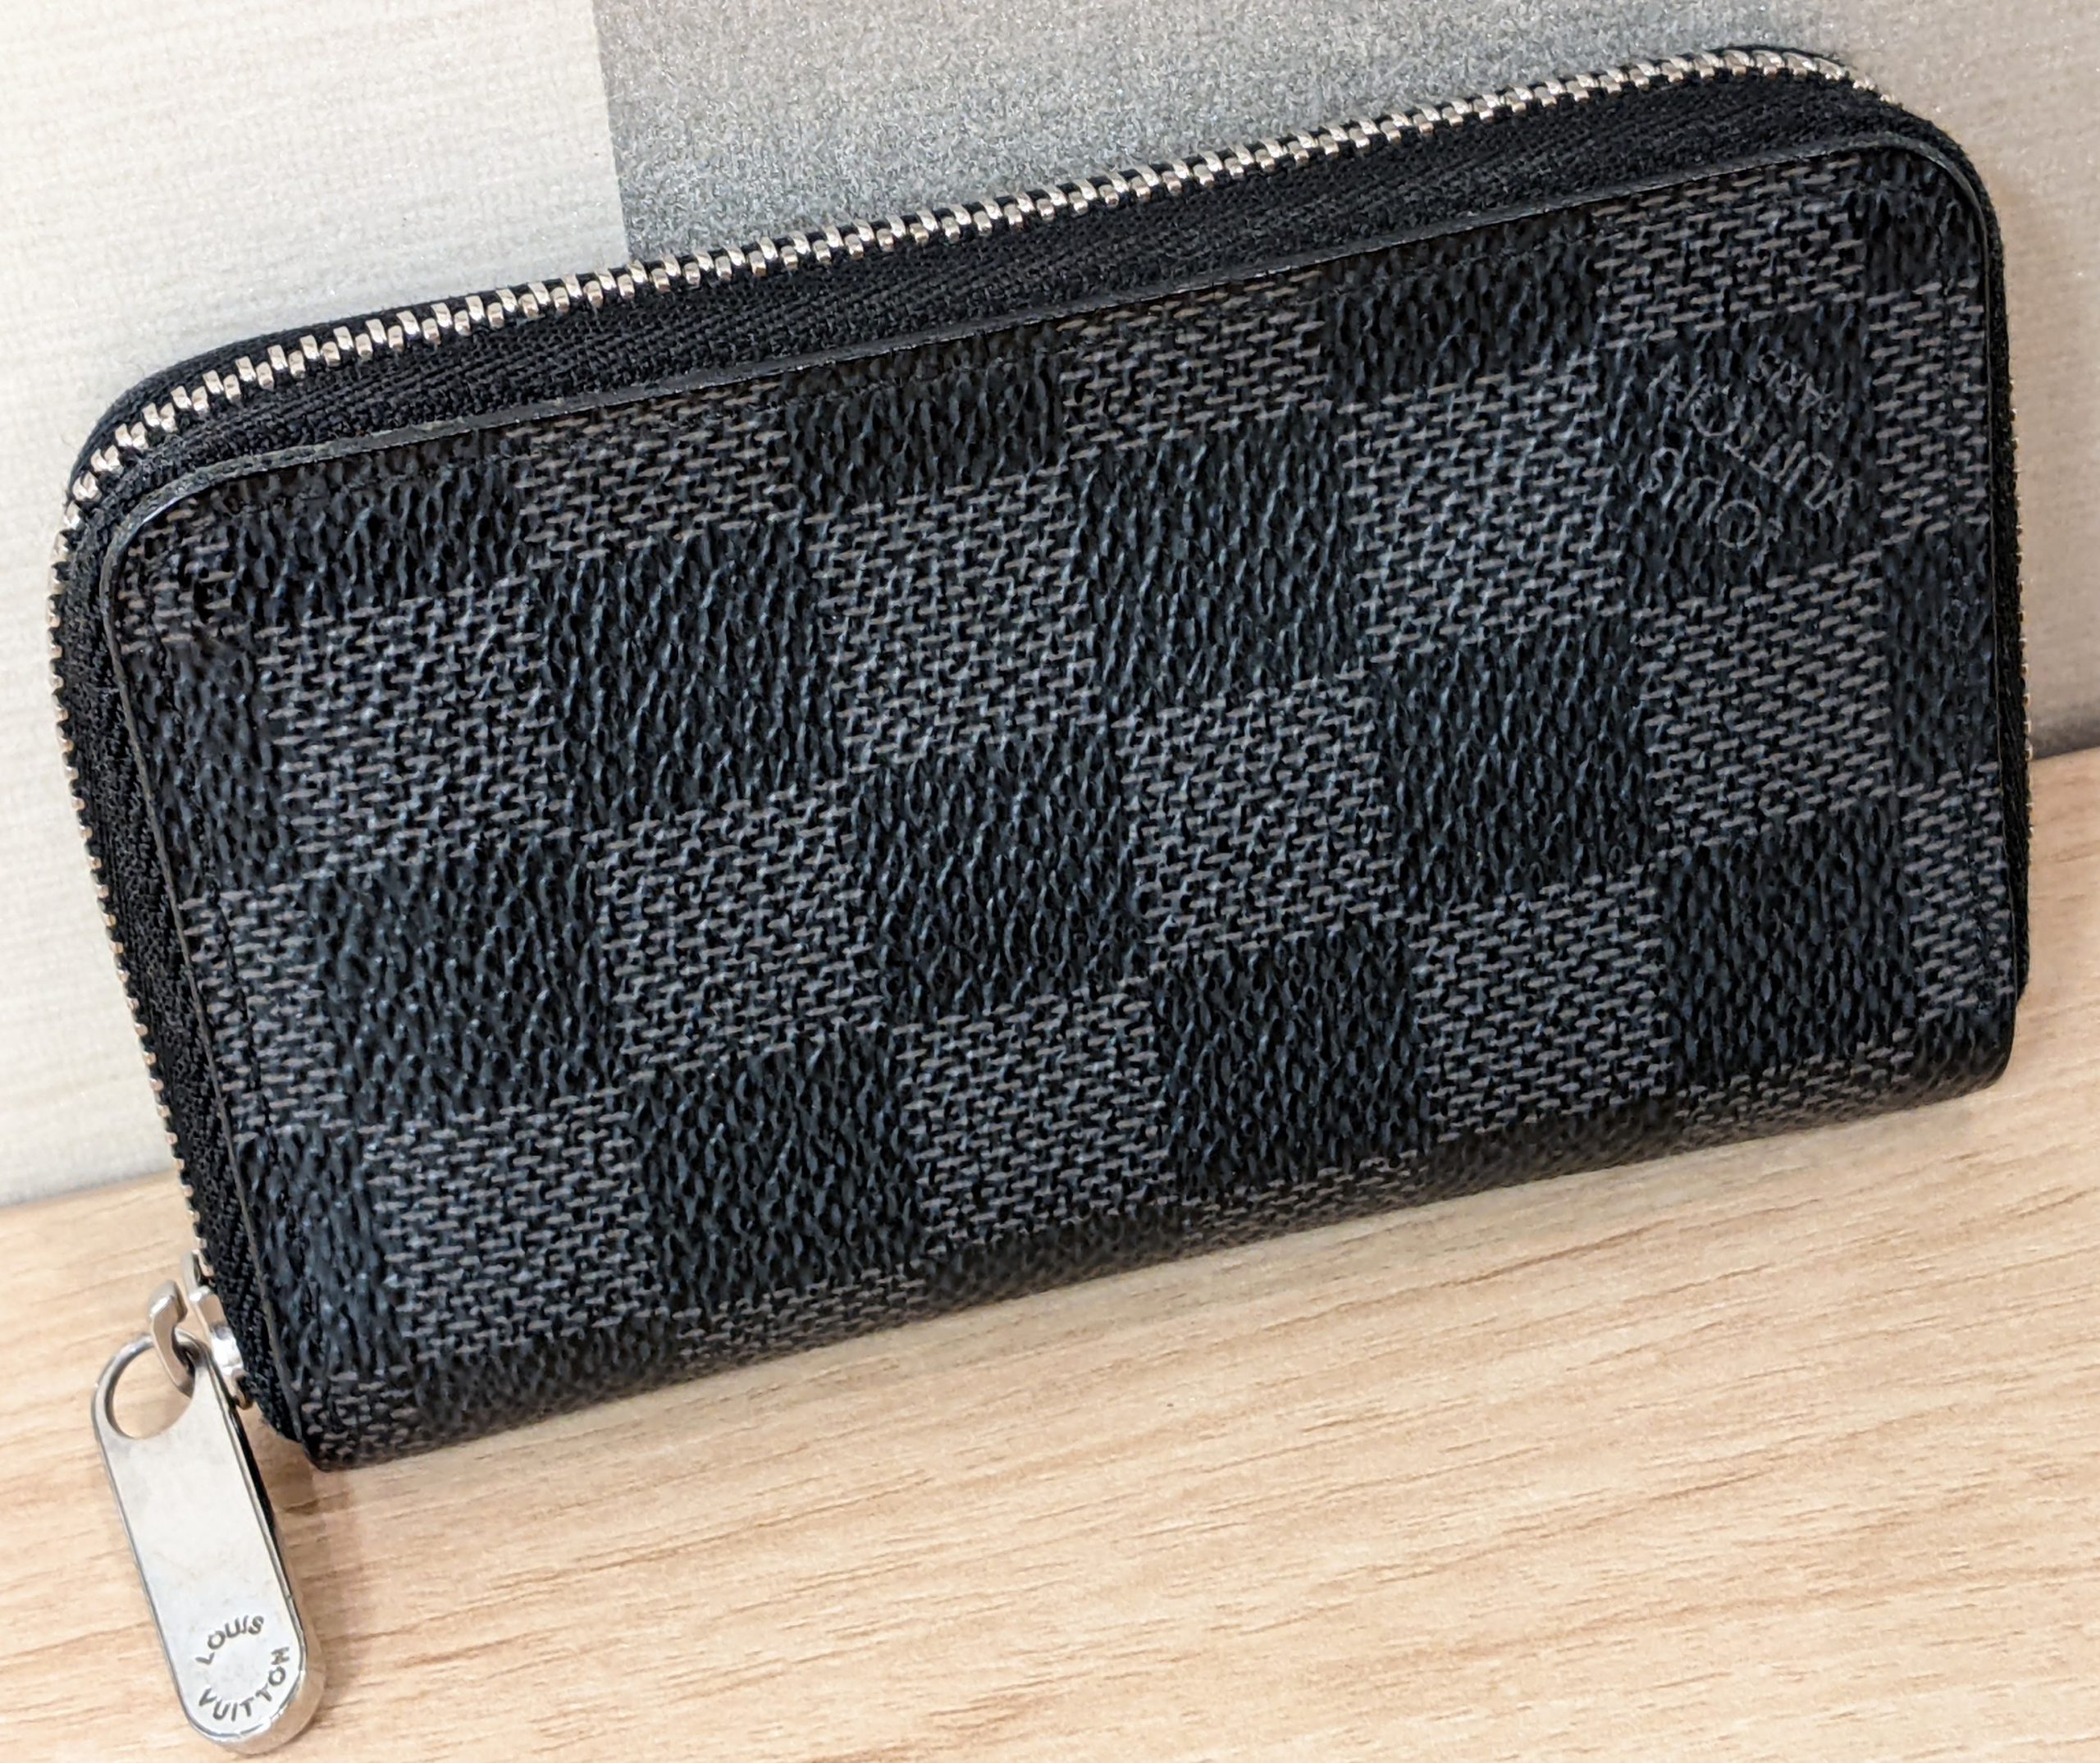 Louis Vuitton,ルイヴィトン,ダミエグラフィット,ジッピーコインパース,N63076